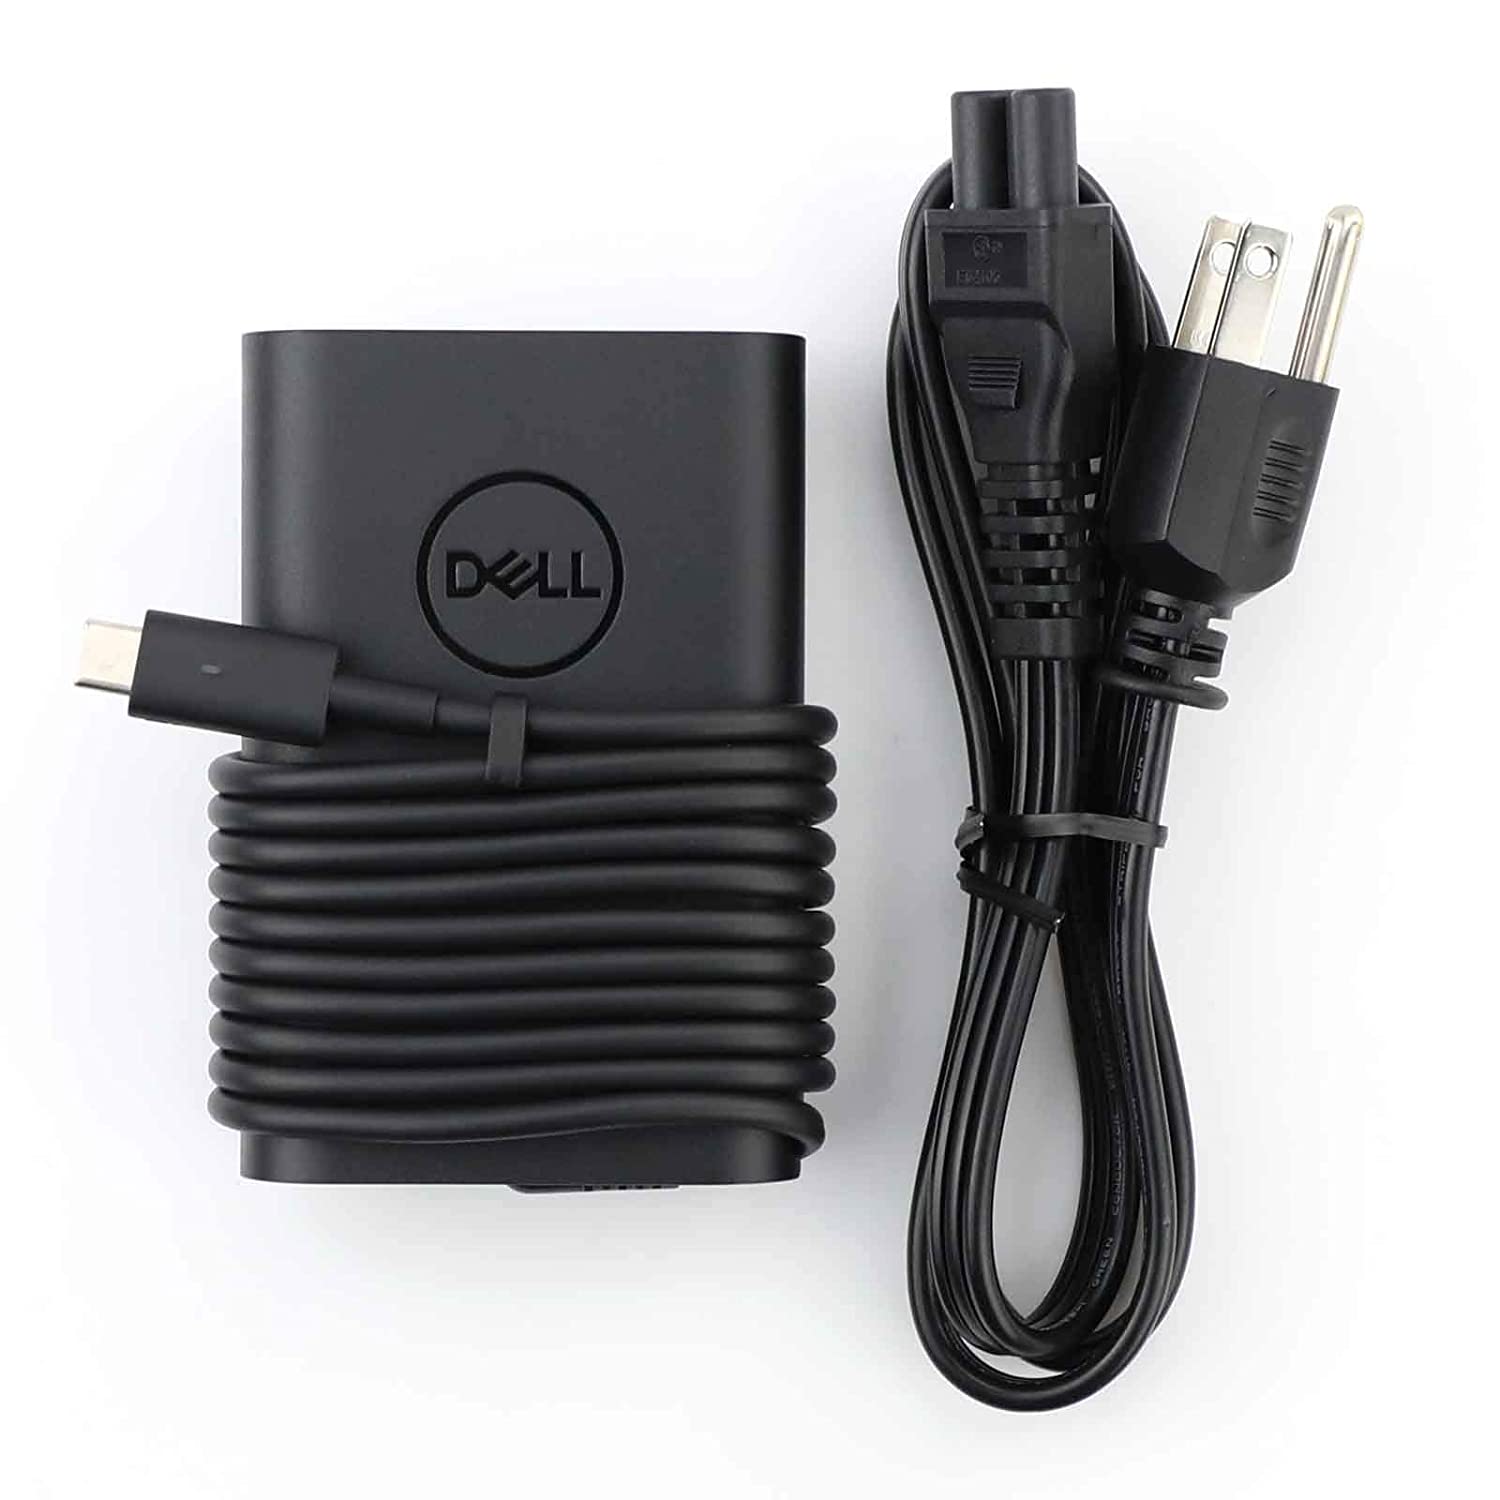 New Dell Laptop Charger 65W(Watt) AC Power Adapter With Type c(USB-C/USBC) Tip Include Power Cord For XPS 12, 9250 XPS 13 9350 9360 9365 9370 9380, Latitude 7370 7280 7480 5480 7275 5290 7490 - image 1 of 6